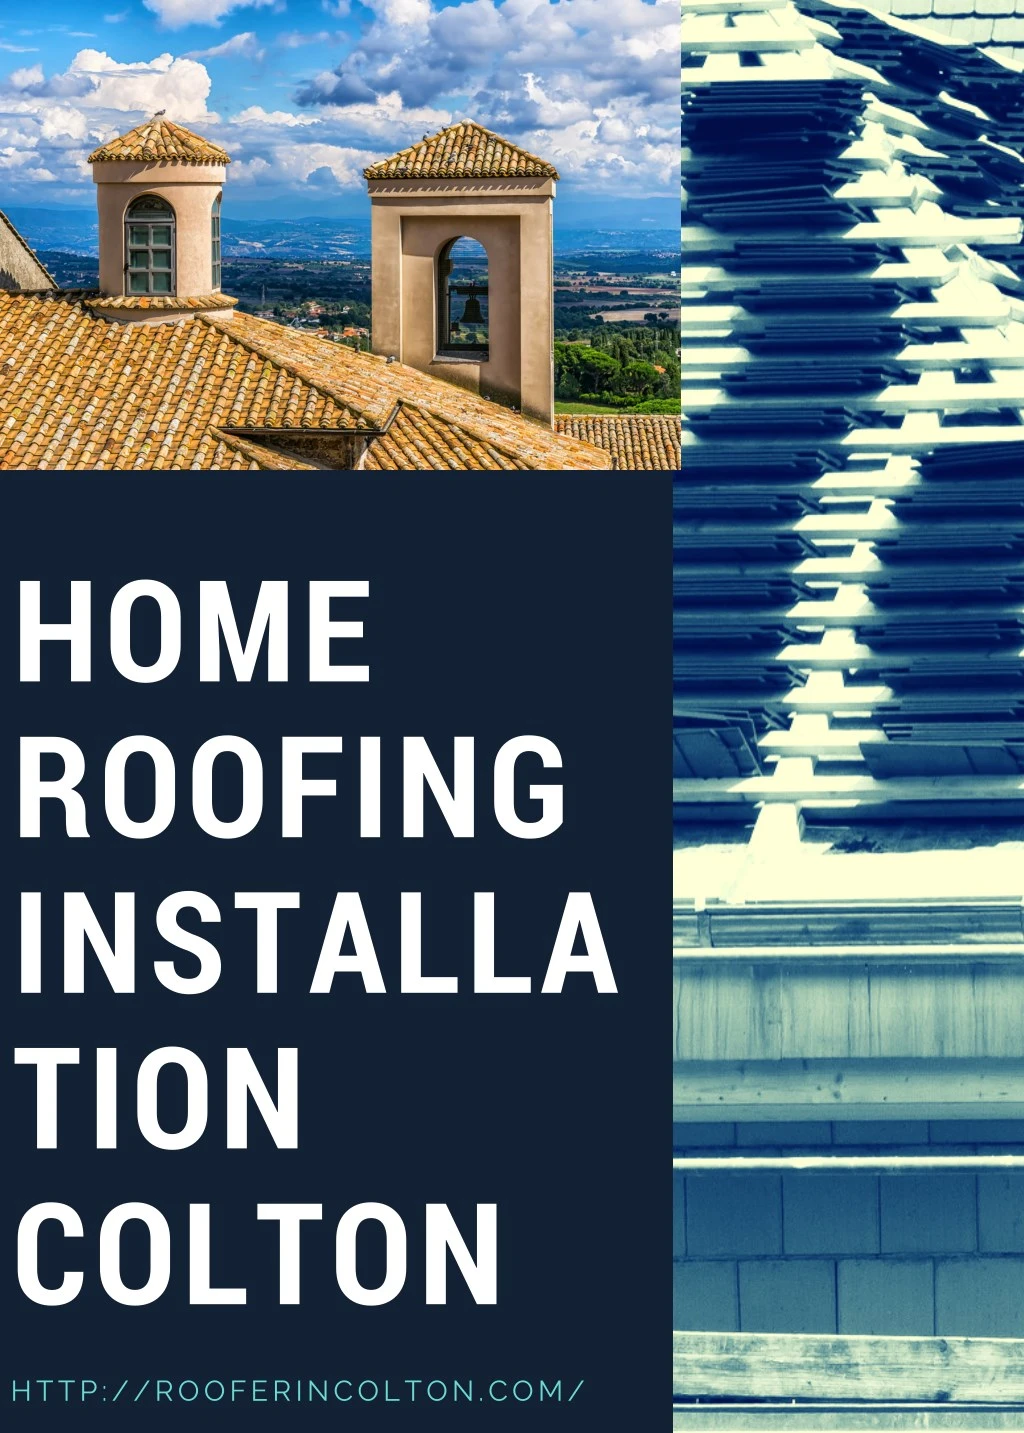 home roofing installa tion colton